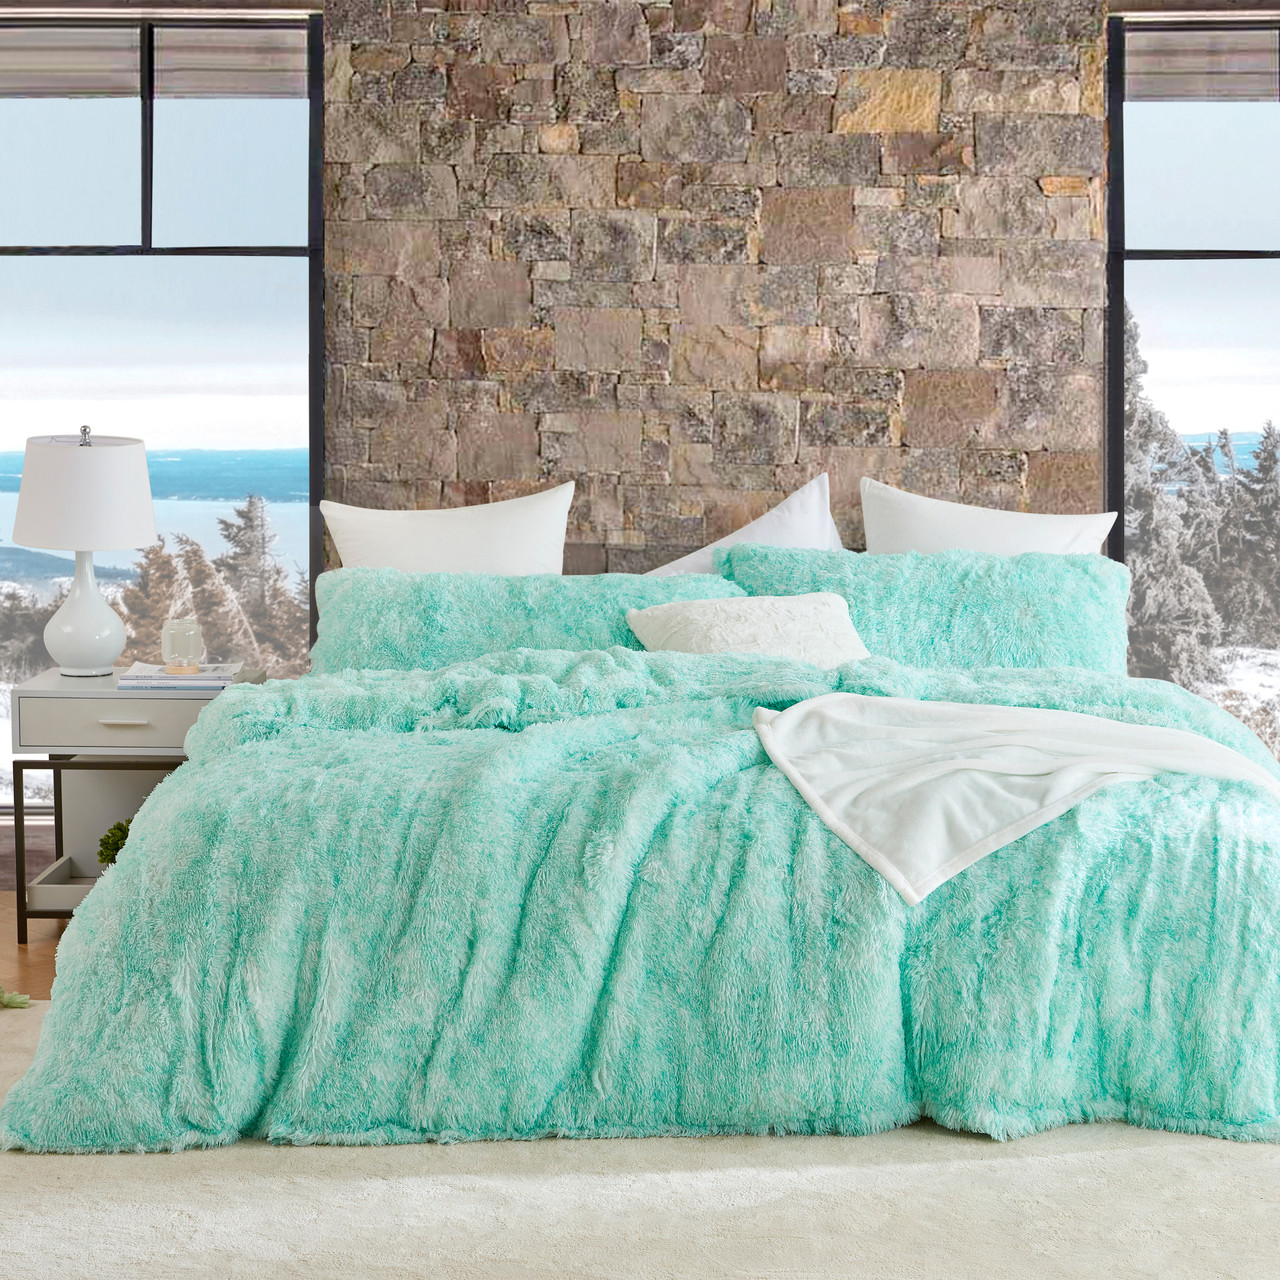 Socially Distant - Coma Inducer Oversized Comforter - Island Hideaway